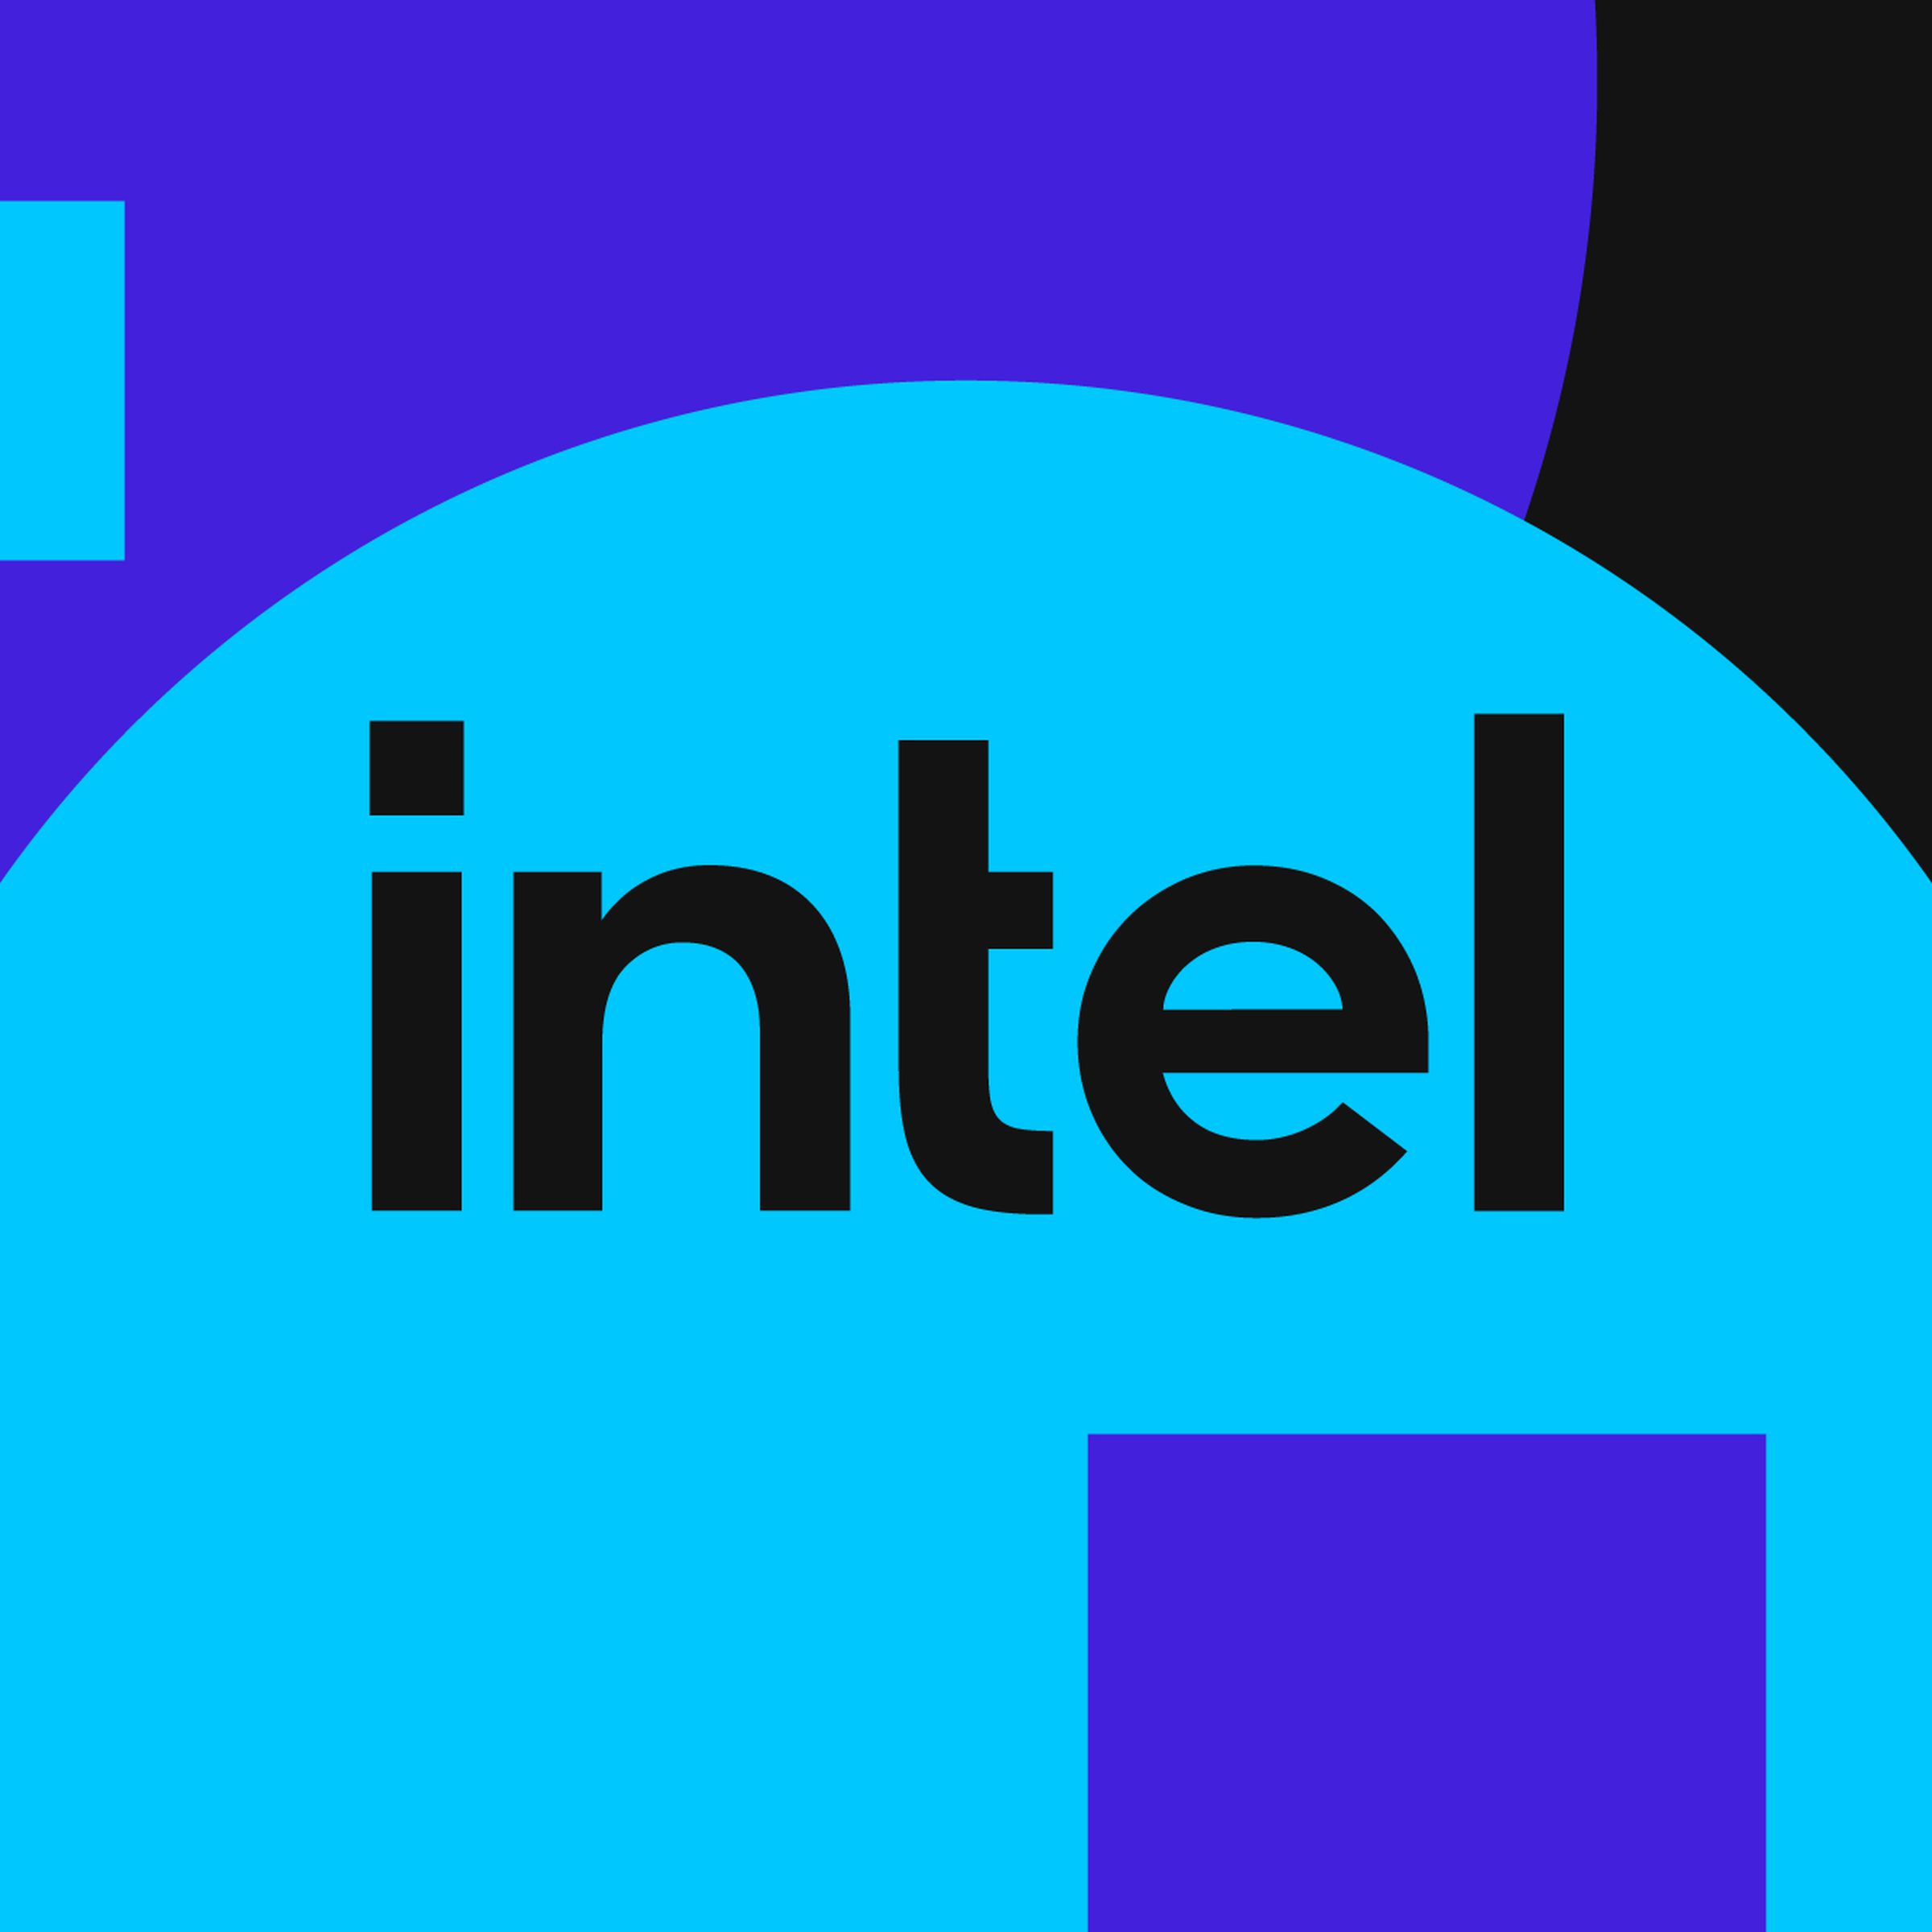 Image of the Intel logo in a blue circle on a black background.